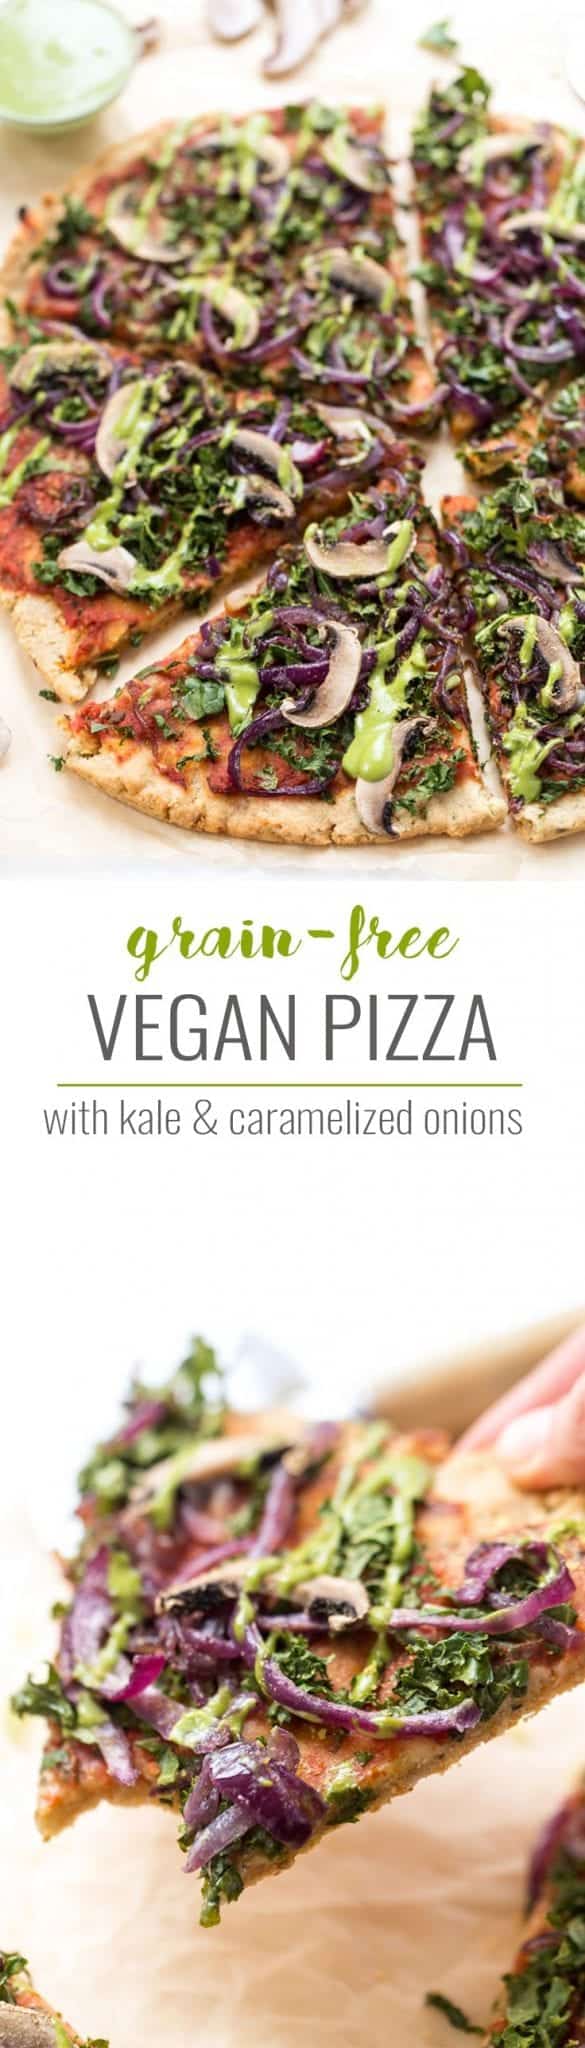 grain-free vegan pizza with caramelized onions and mushrooms